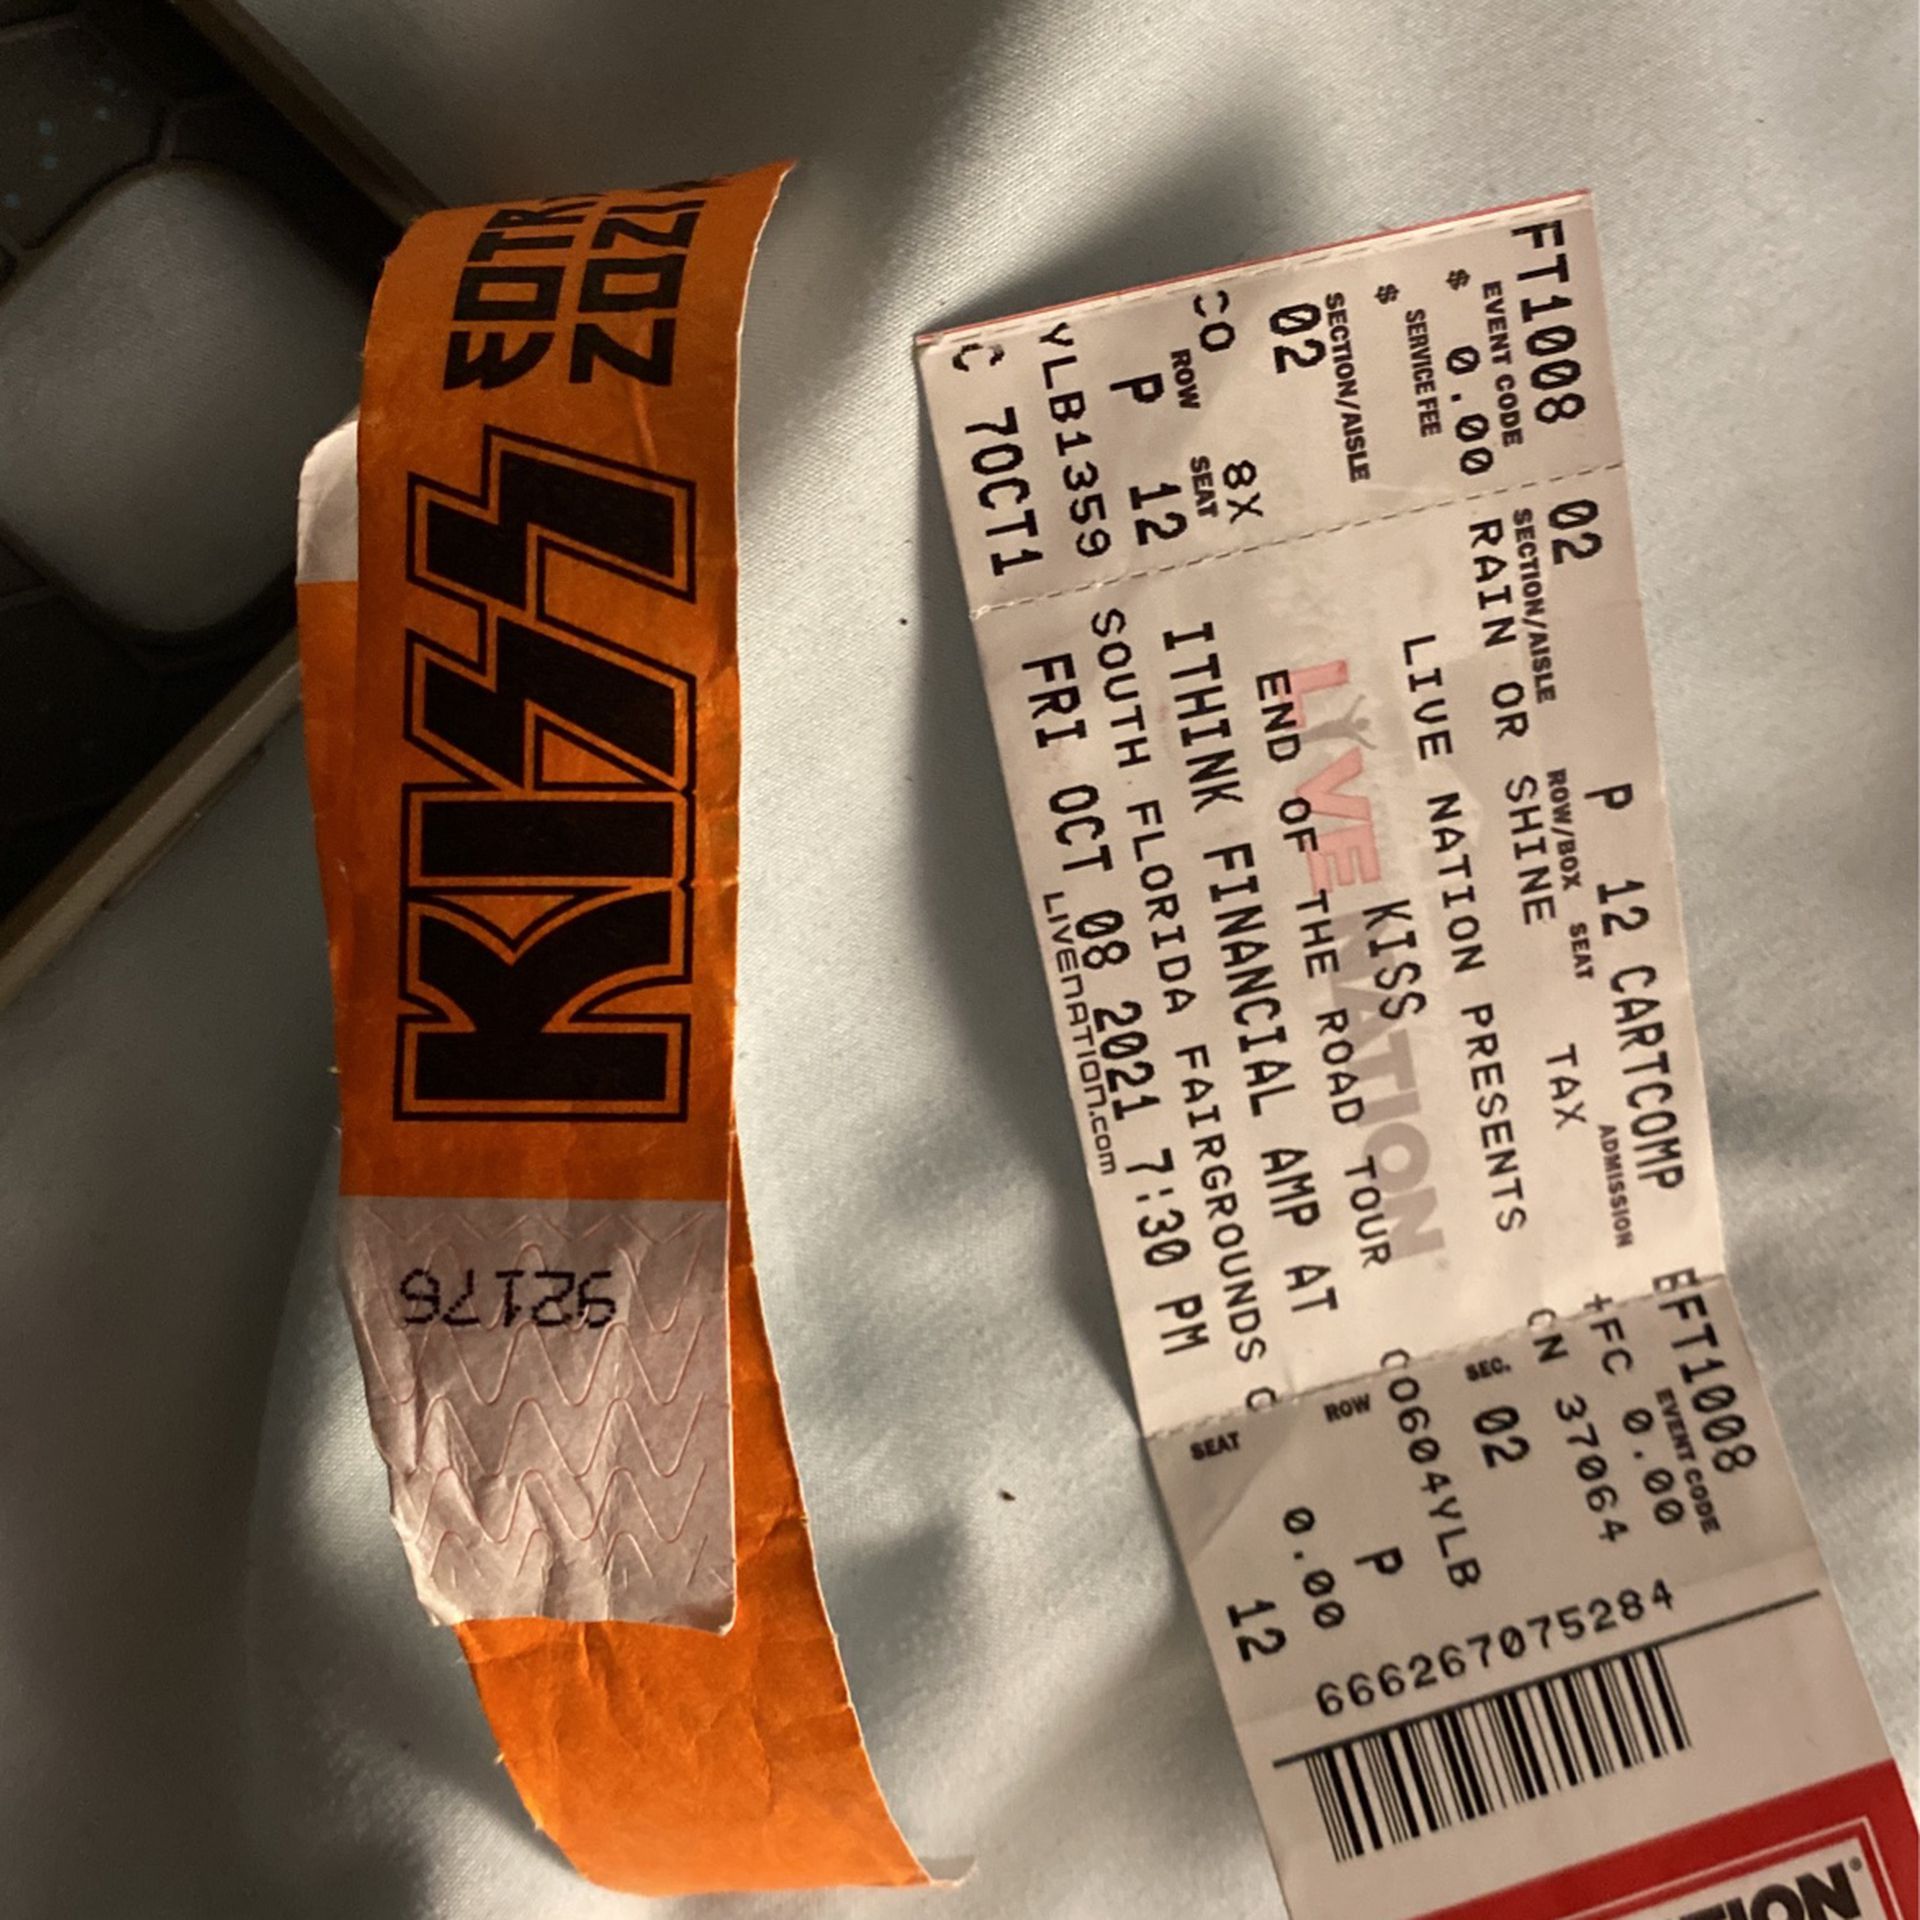 1-2 Tickets Available November 5th VIP Pass Picture With Kiss Front Row Spot 